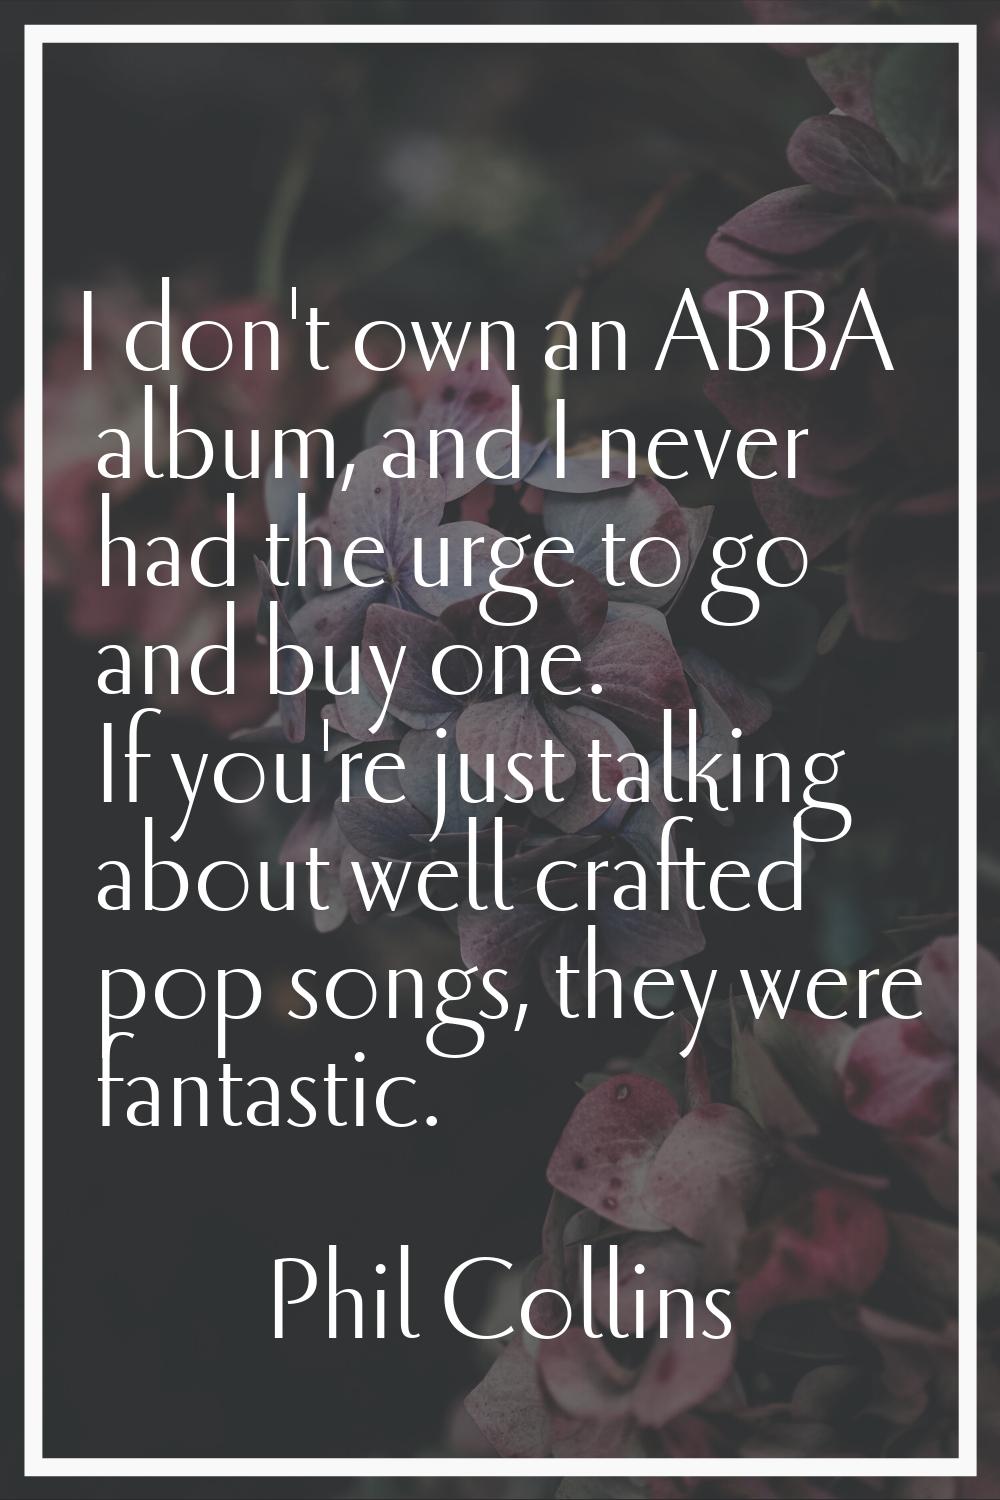 I don't own an ABBA album, and I never had the urge to go and buy one. If you're just talking about